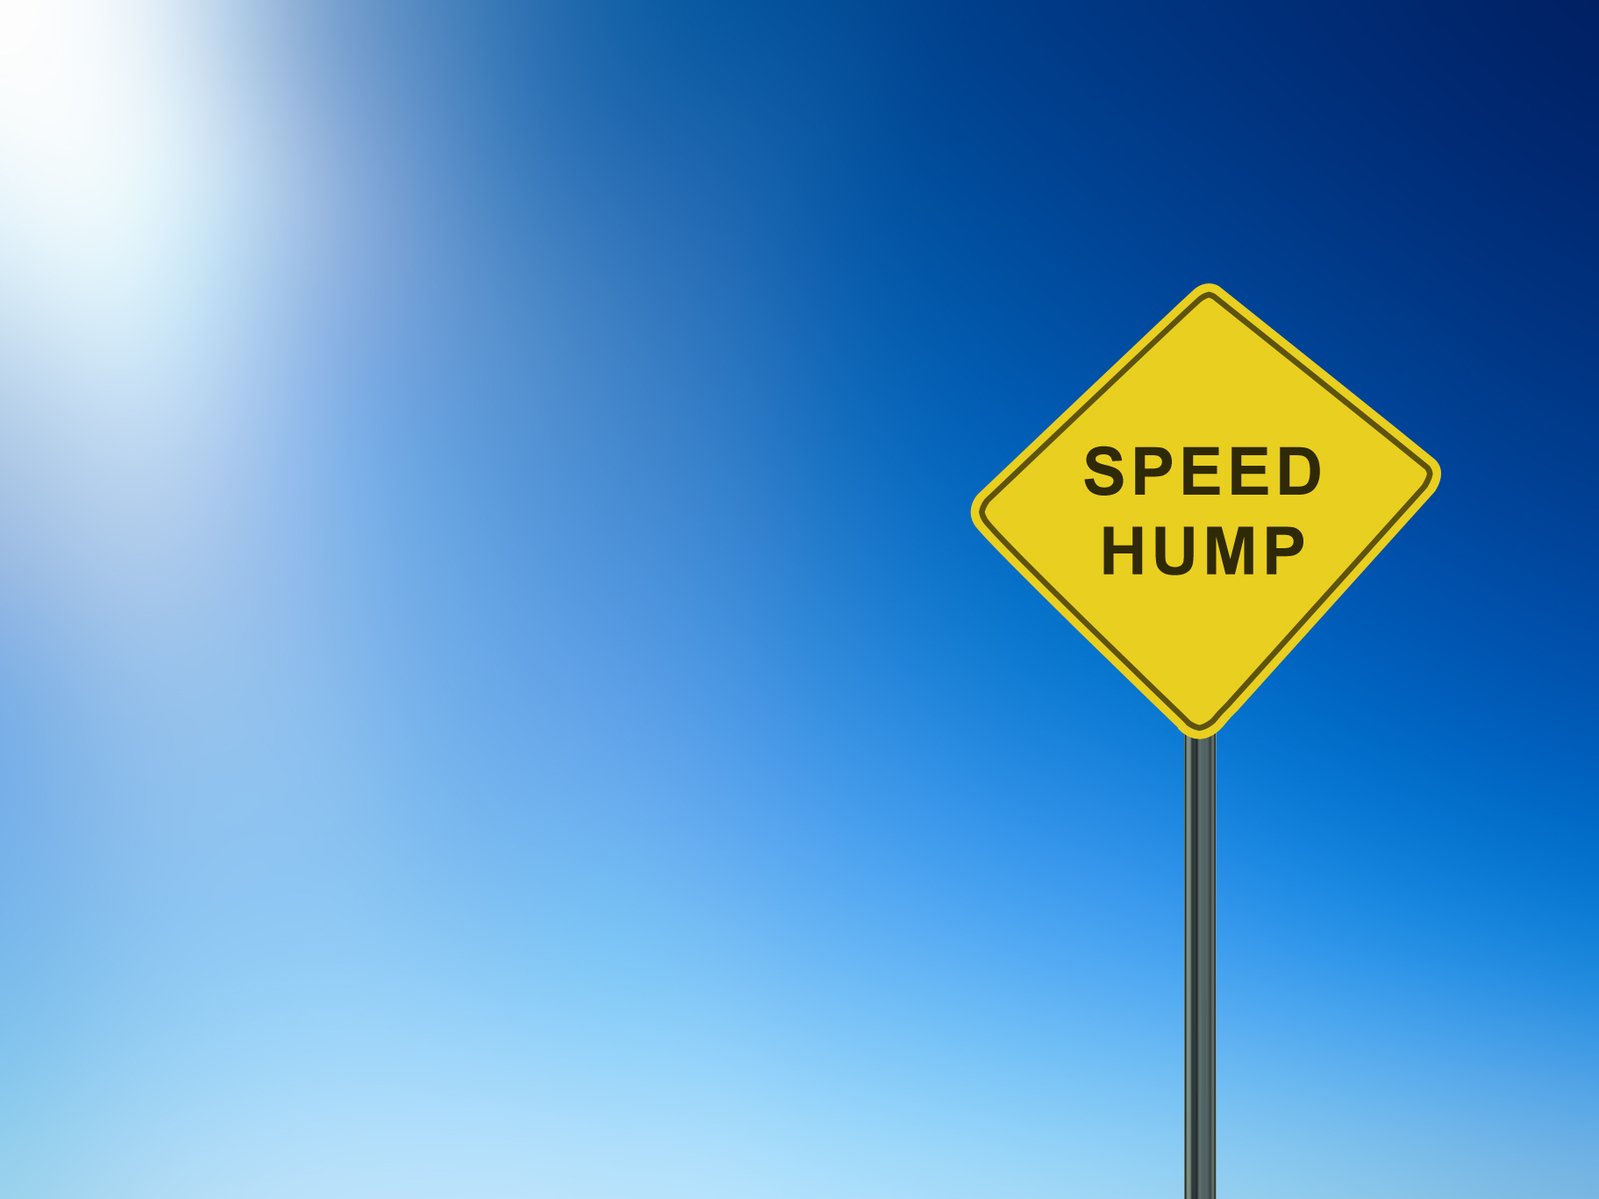 a yellow speed hump road sign against a blue sky